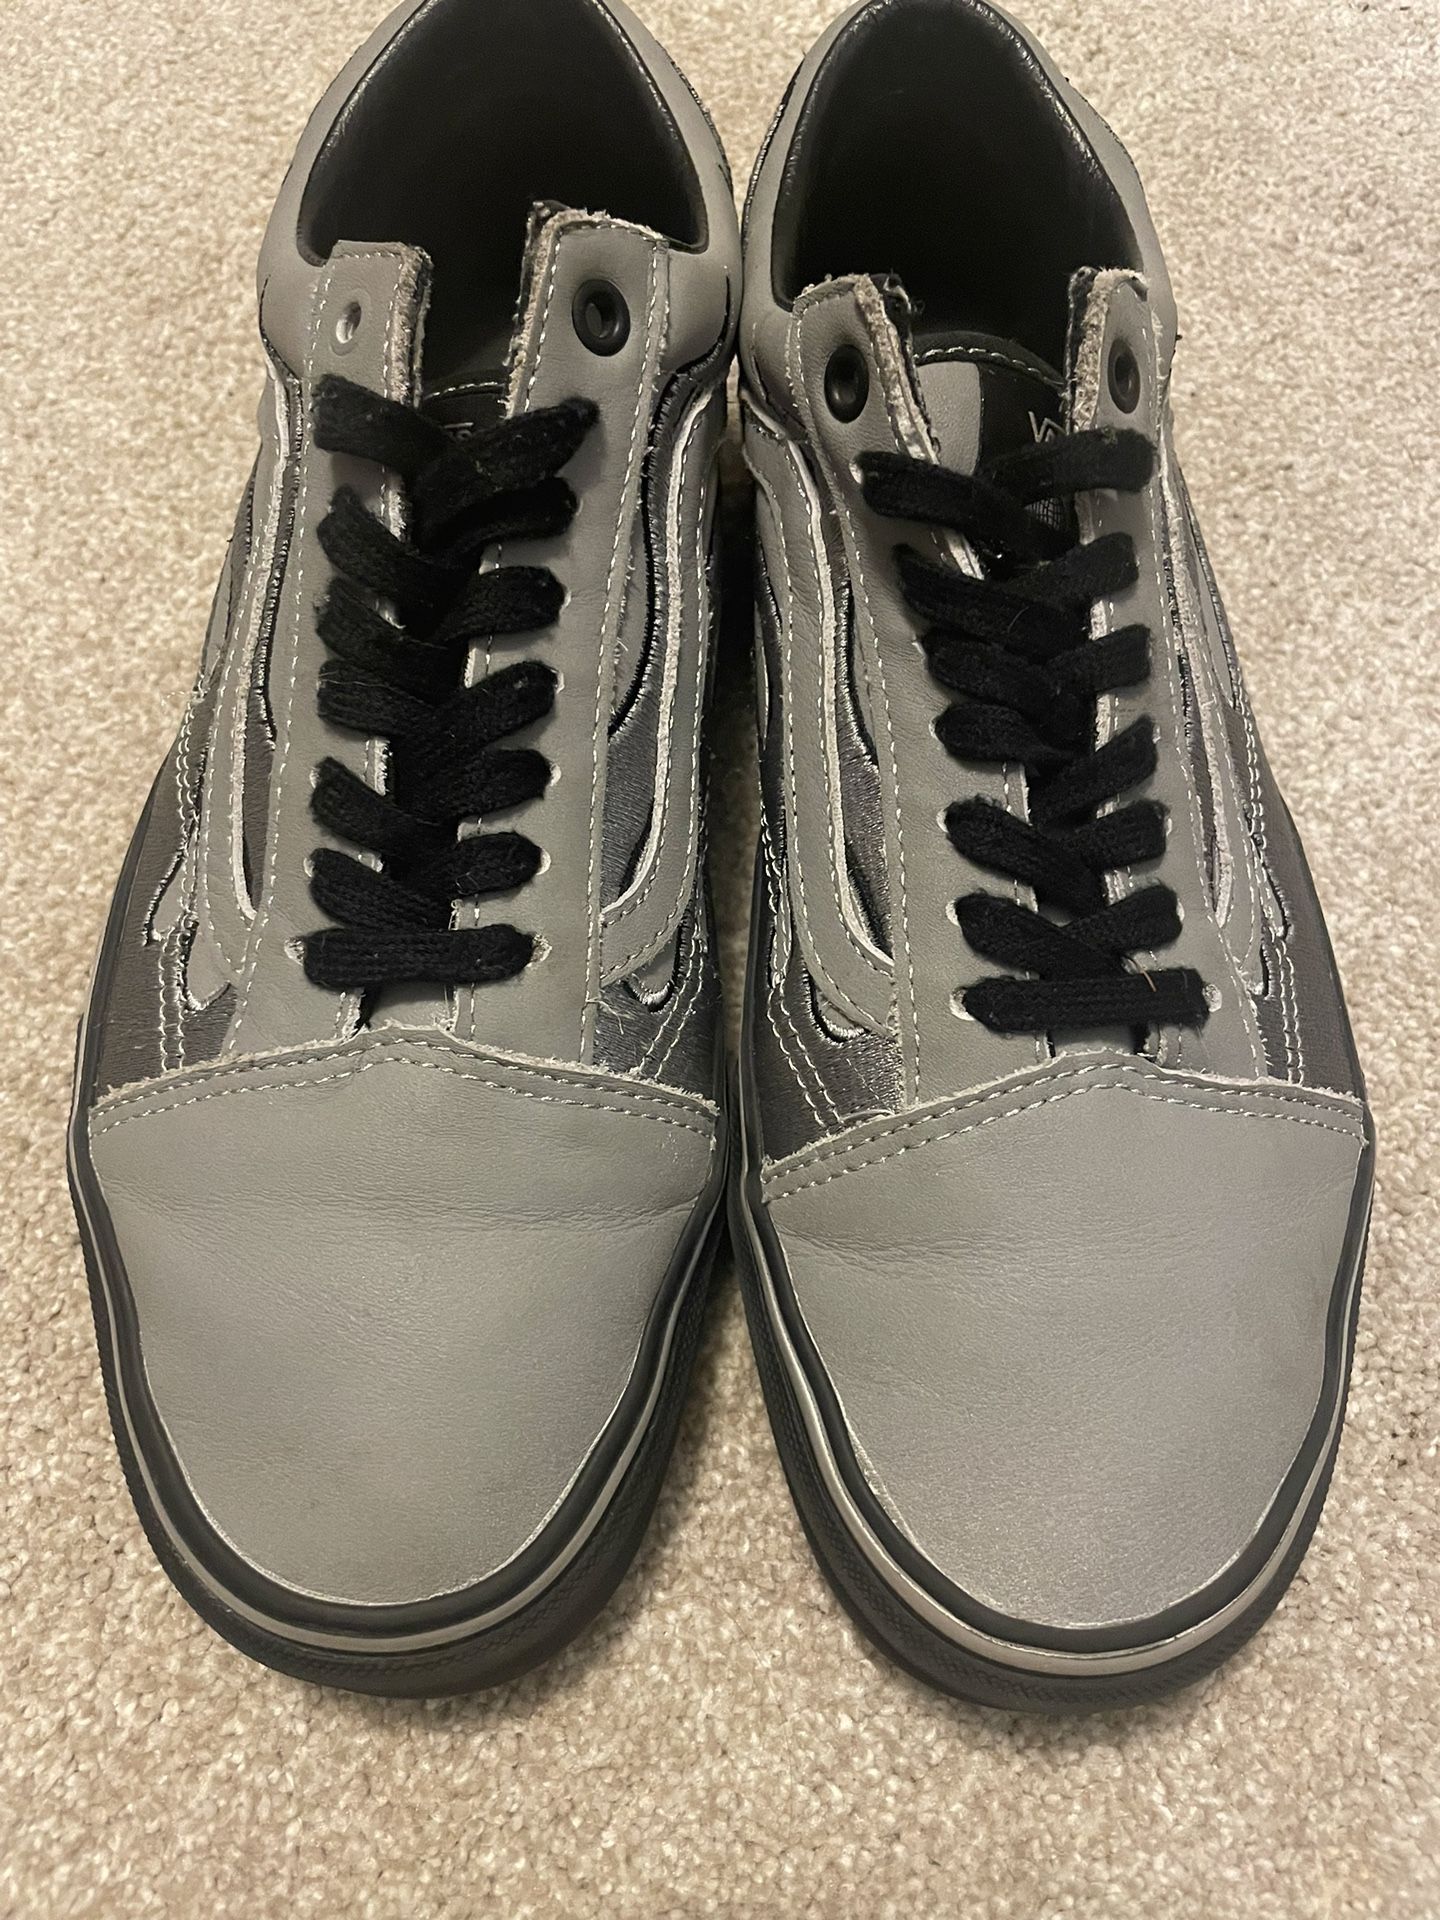 Vans x A$AP Worldwide Silver Reflective Old Skool Shoes